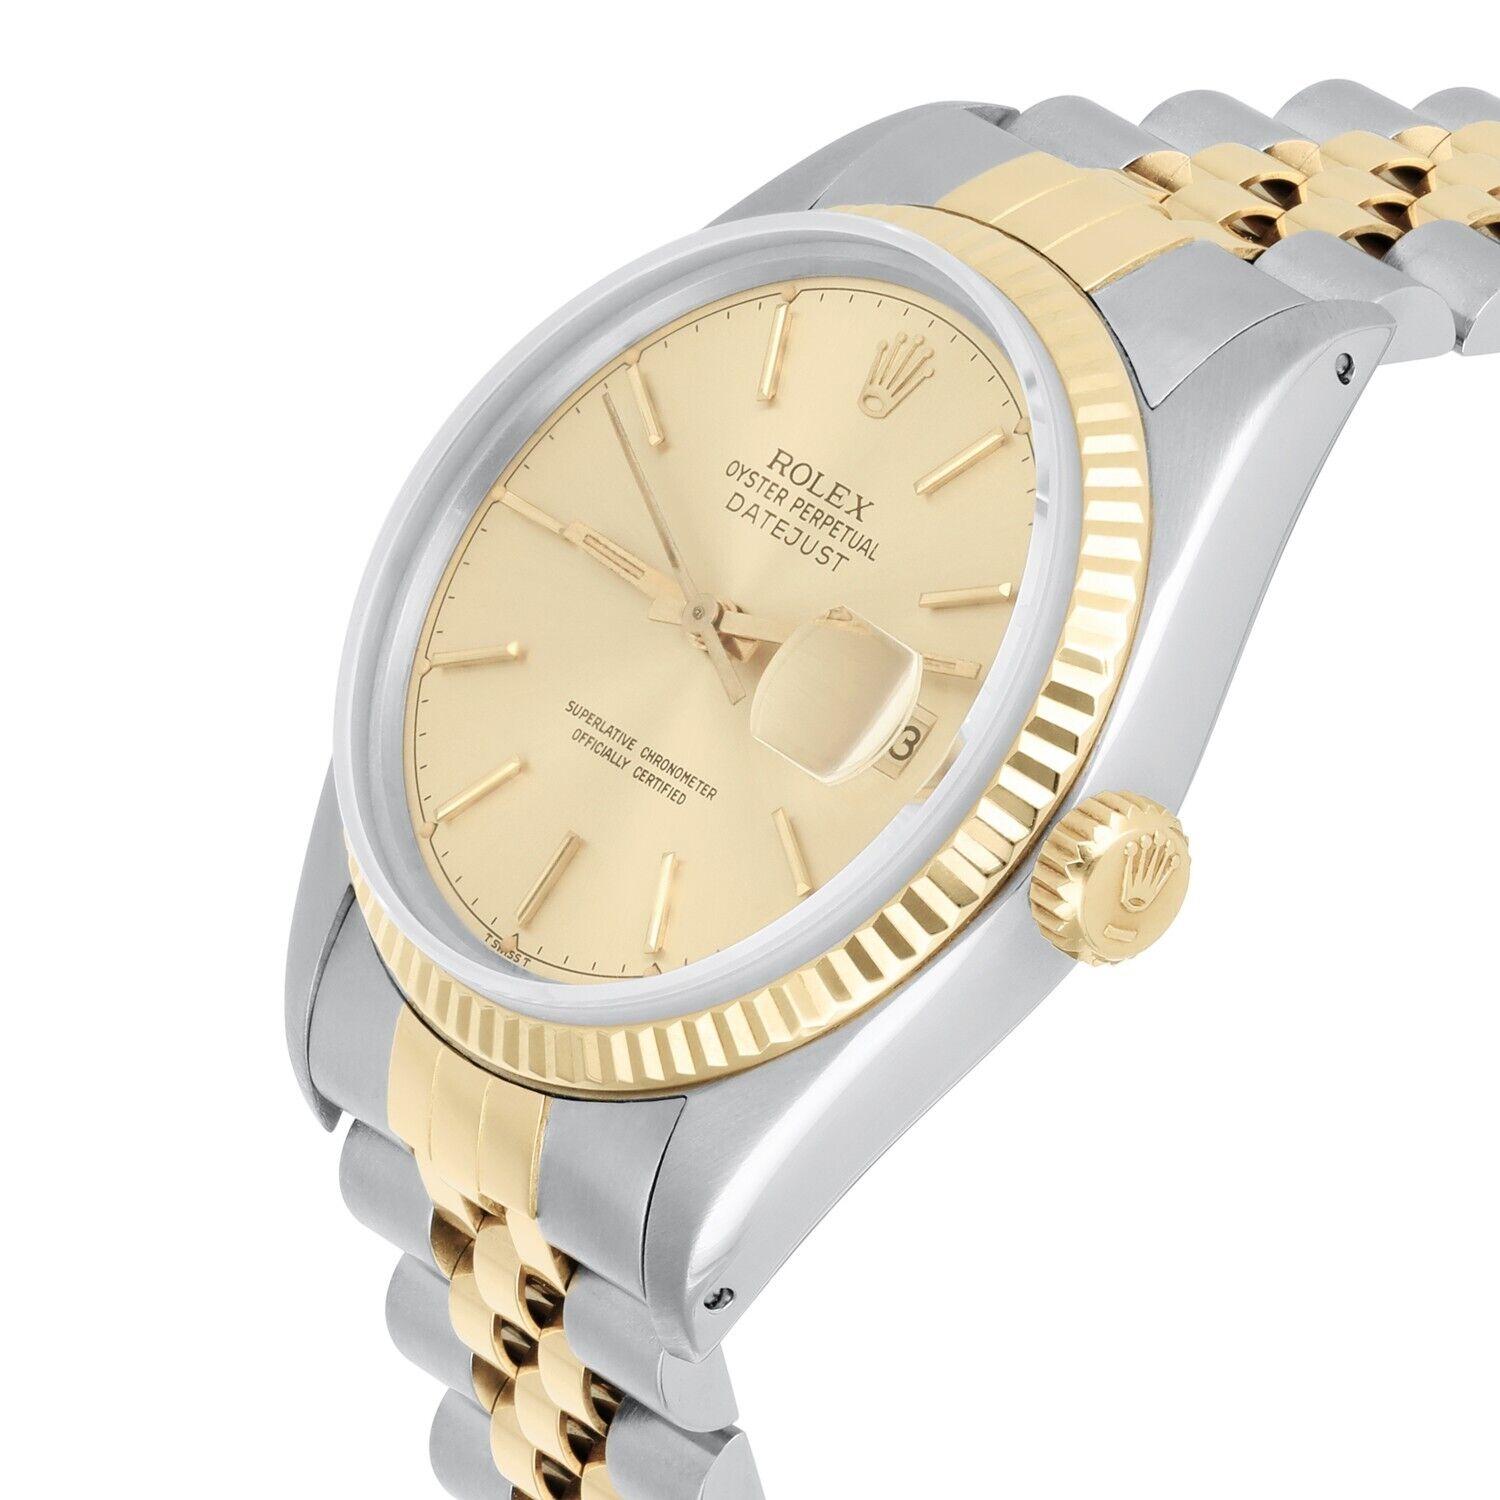 Rolex Datejust 36mm Two Tone Champagne Dial Jubilee Band 16013 Circa 1979 B/P In Excellent Condition For Sale In New York, NY